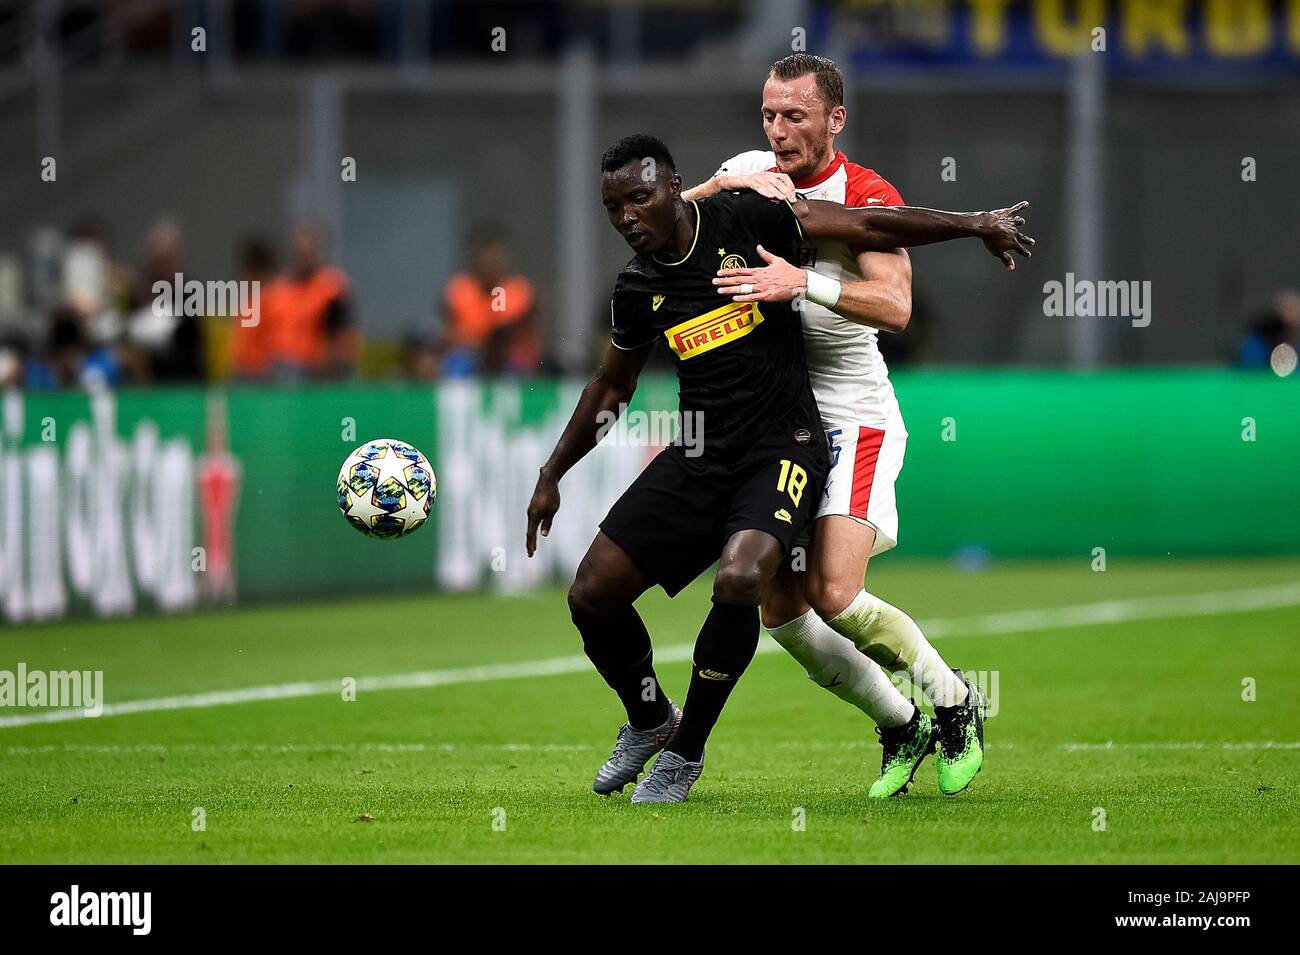 Milan, Italy. 17 September, 2019: Kwadwo Asamoah (L) of FC Internazionale competes for the ball with Vladimir Coufal of SK Slavia Praha during the UEFA Champions League football match between FC Internazionale and SK Slavia Praha. The match ended in a 1-1 tie. Credit: Nicolò Campo/Alamy Live News Stock Photo